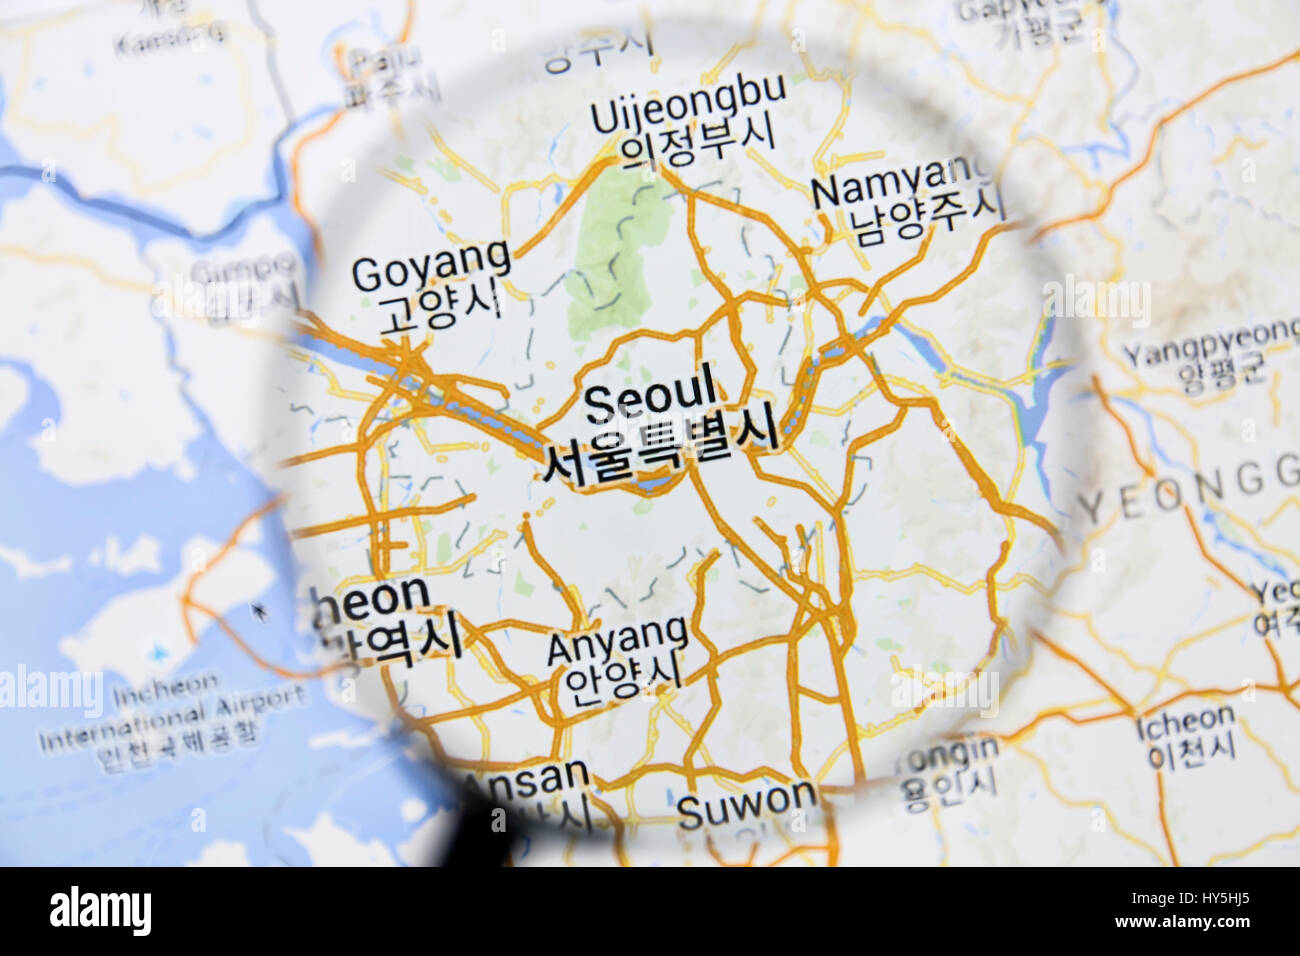 Map of Seoul on Google Maps under a magnifying glass. Seoul is the capital city of South Korea Stock Photo